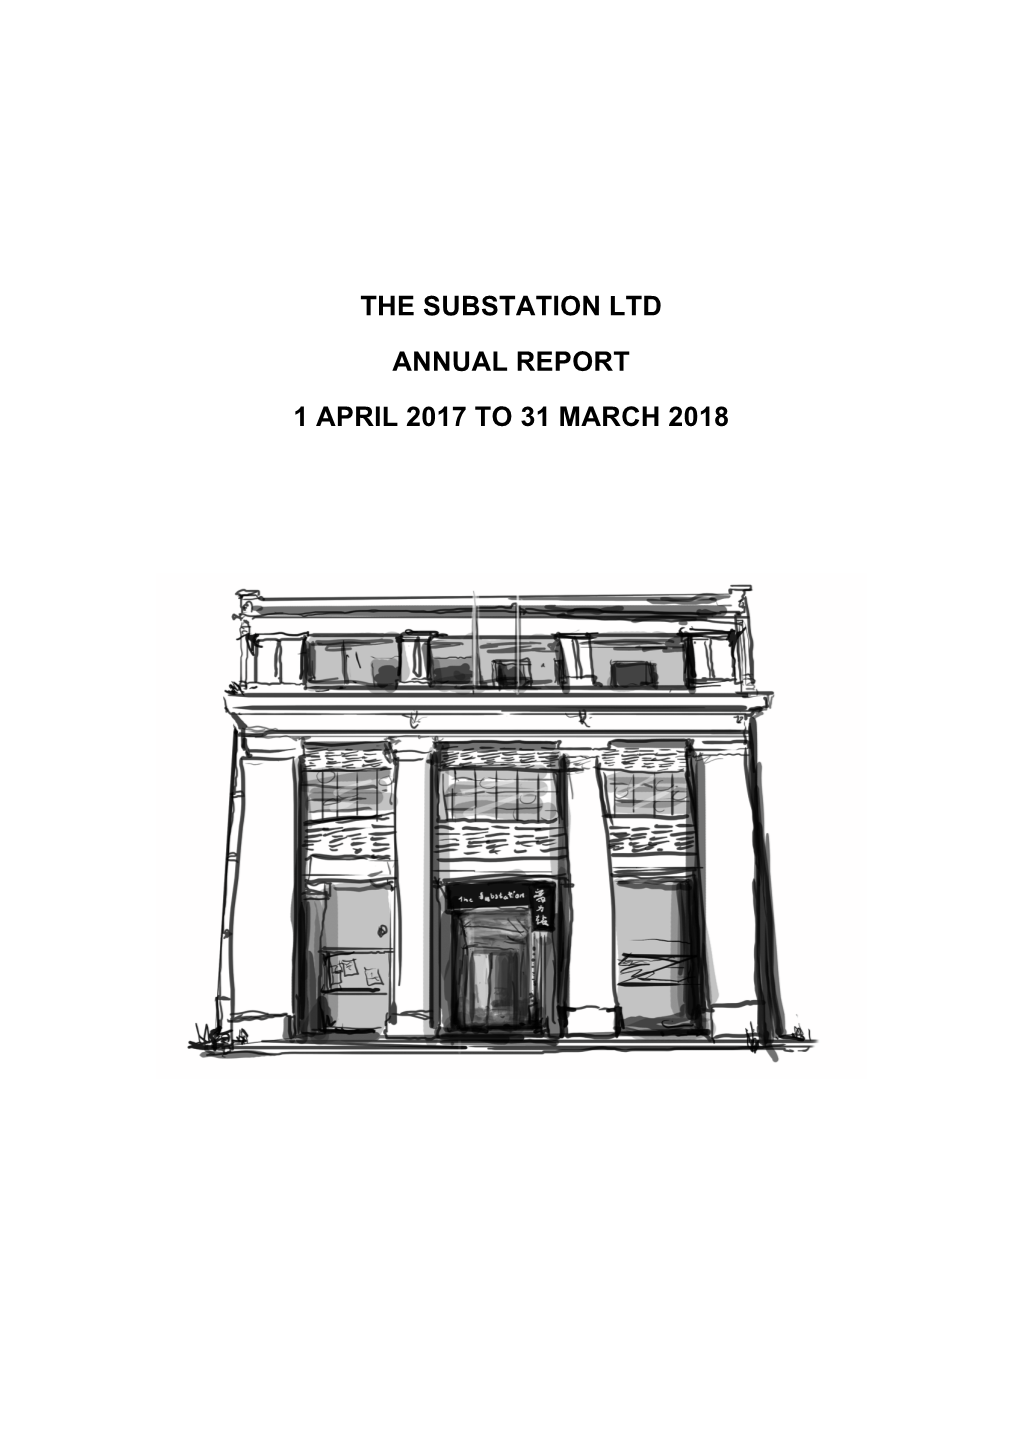 The Substation Ltd Annual Report 1 April 2017 to 31